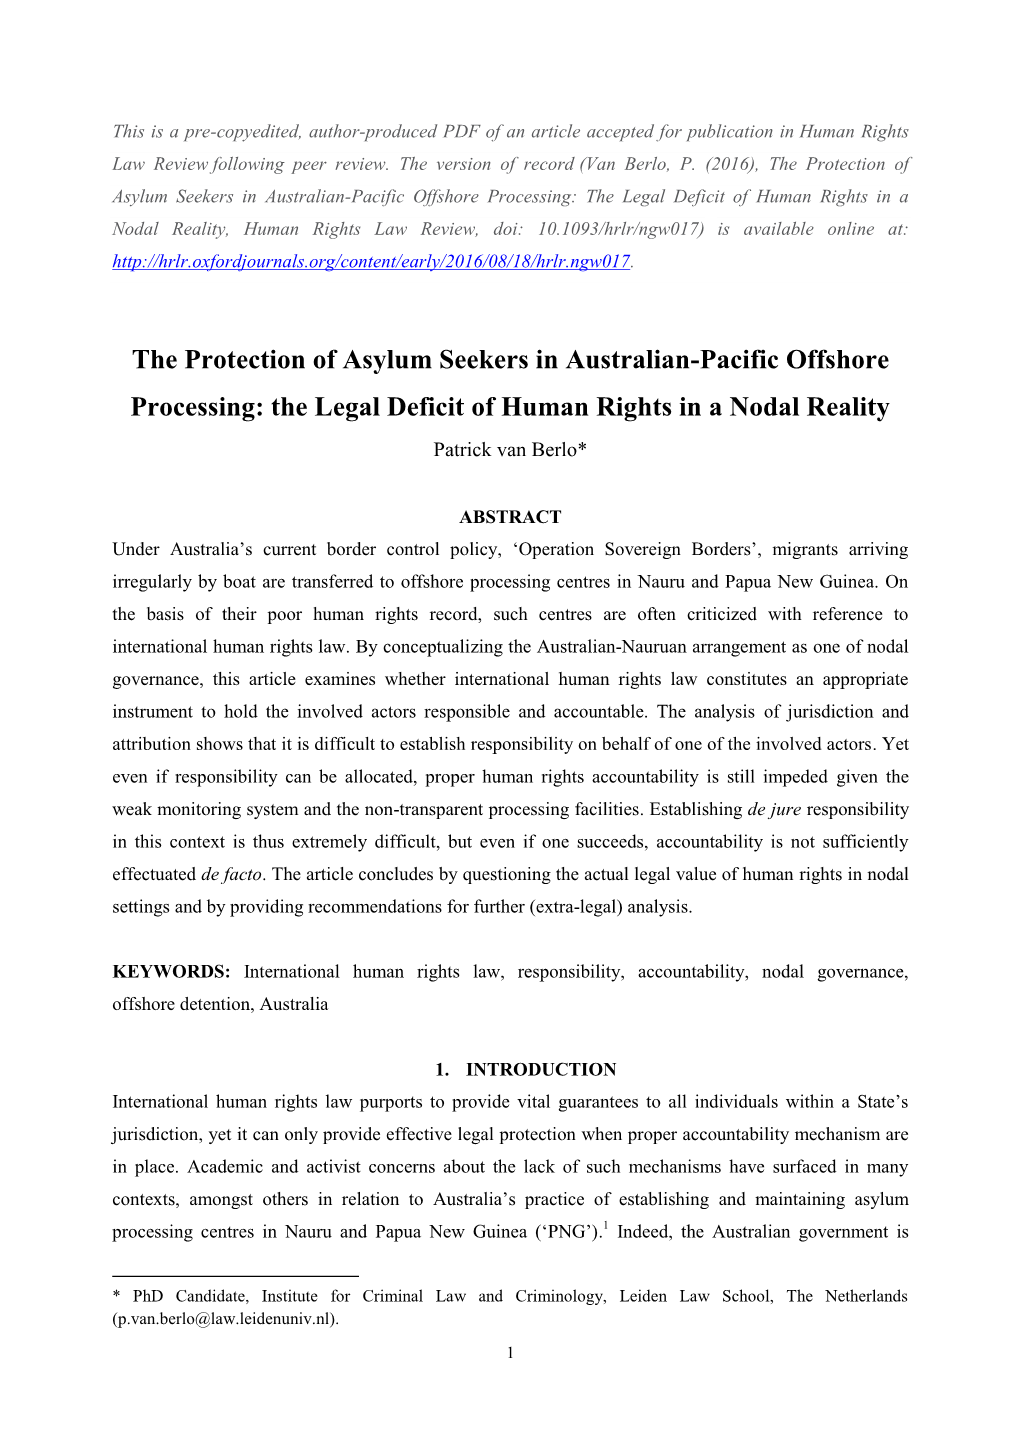 The Protection of Asylum Seekers in Australian-Pacific Offshore Processing: the Legal Deficit of Human Rights in A